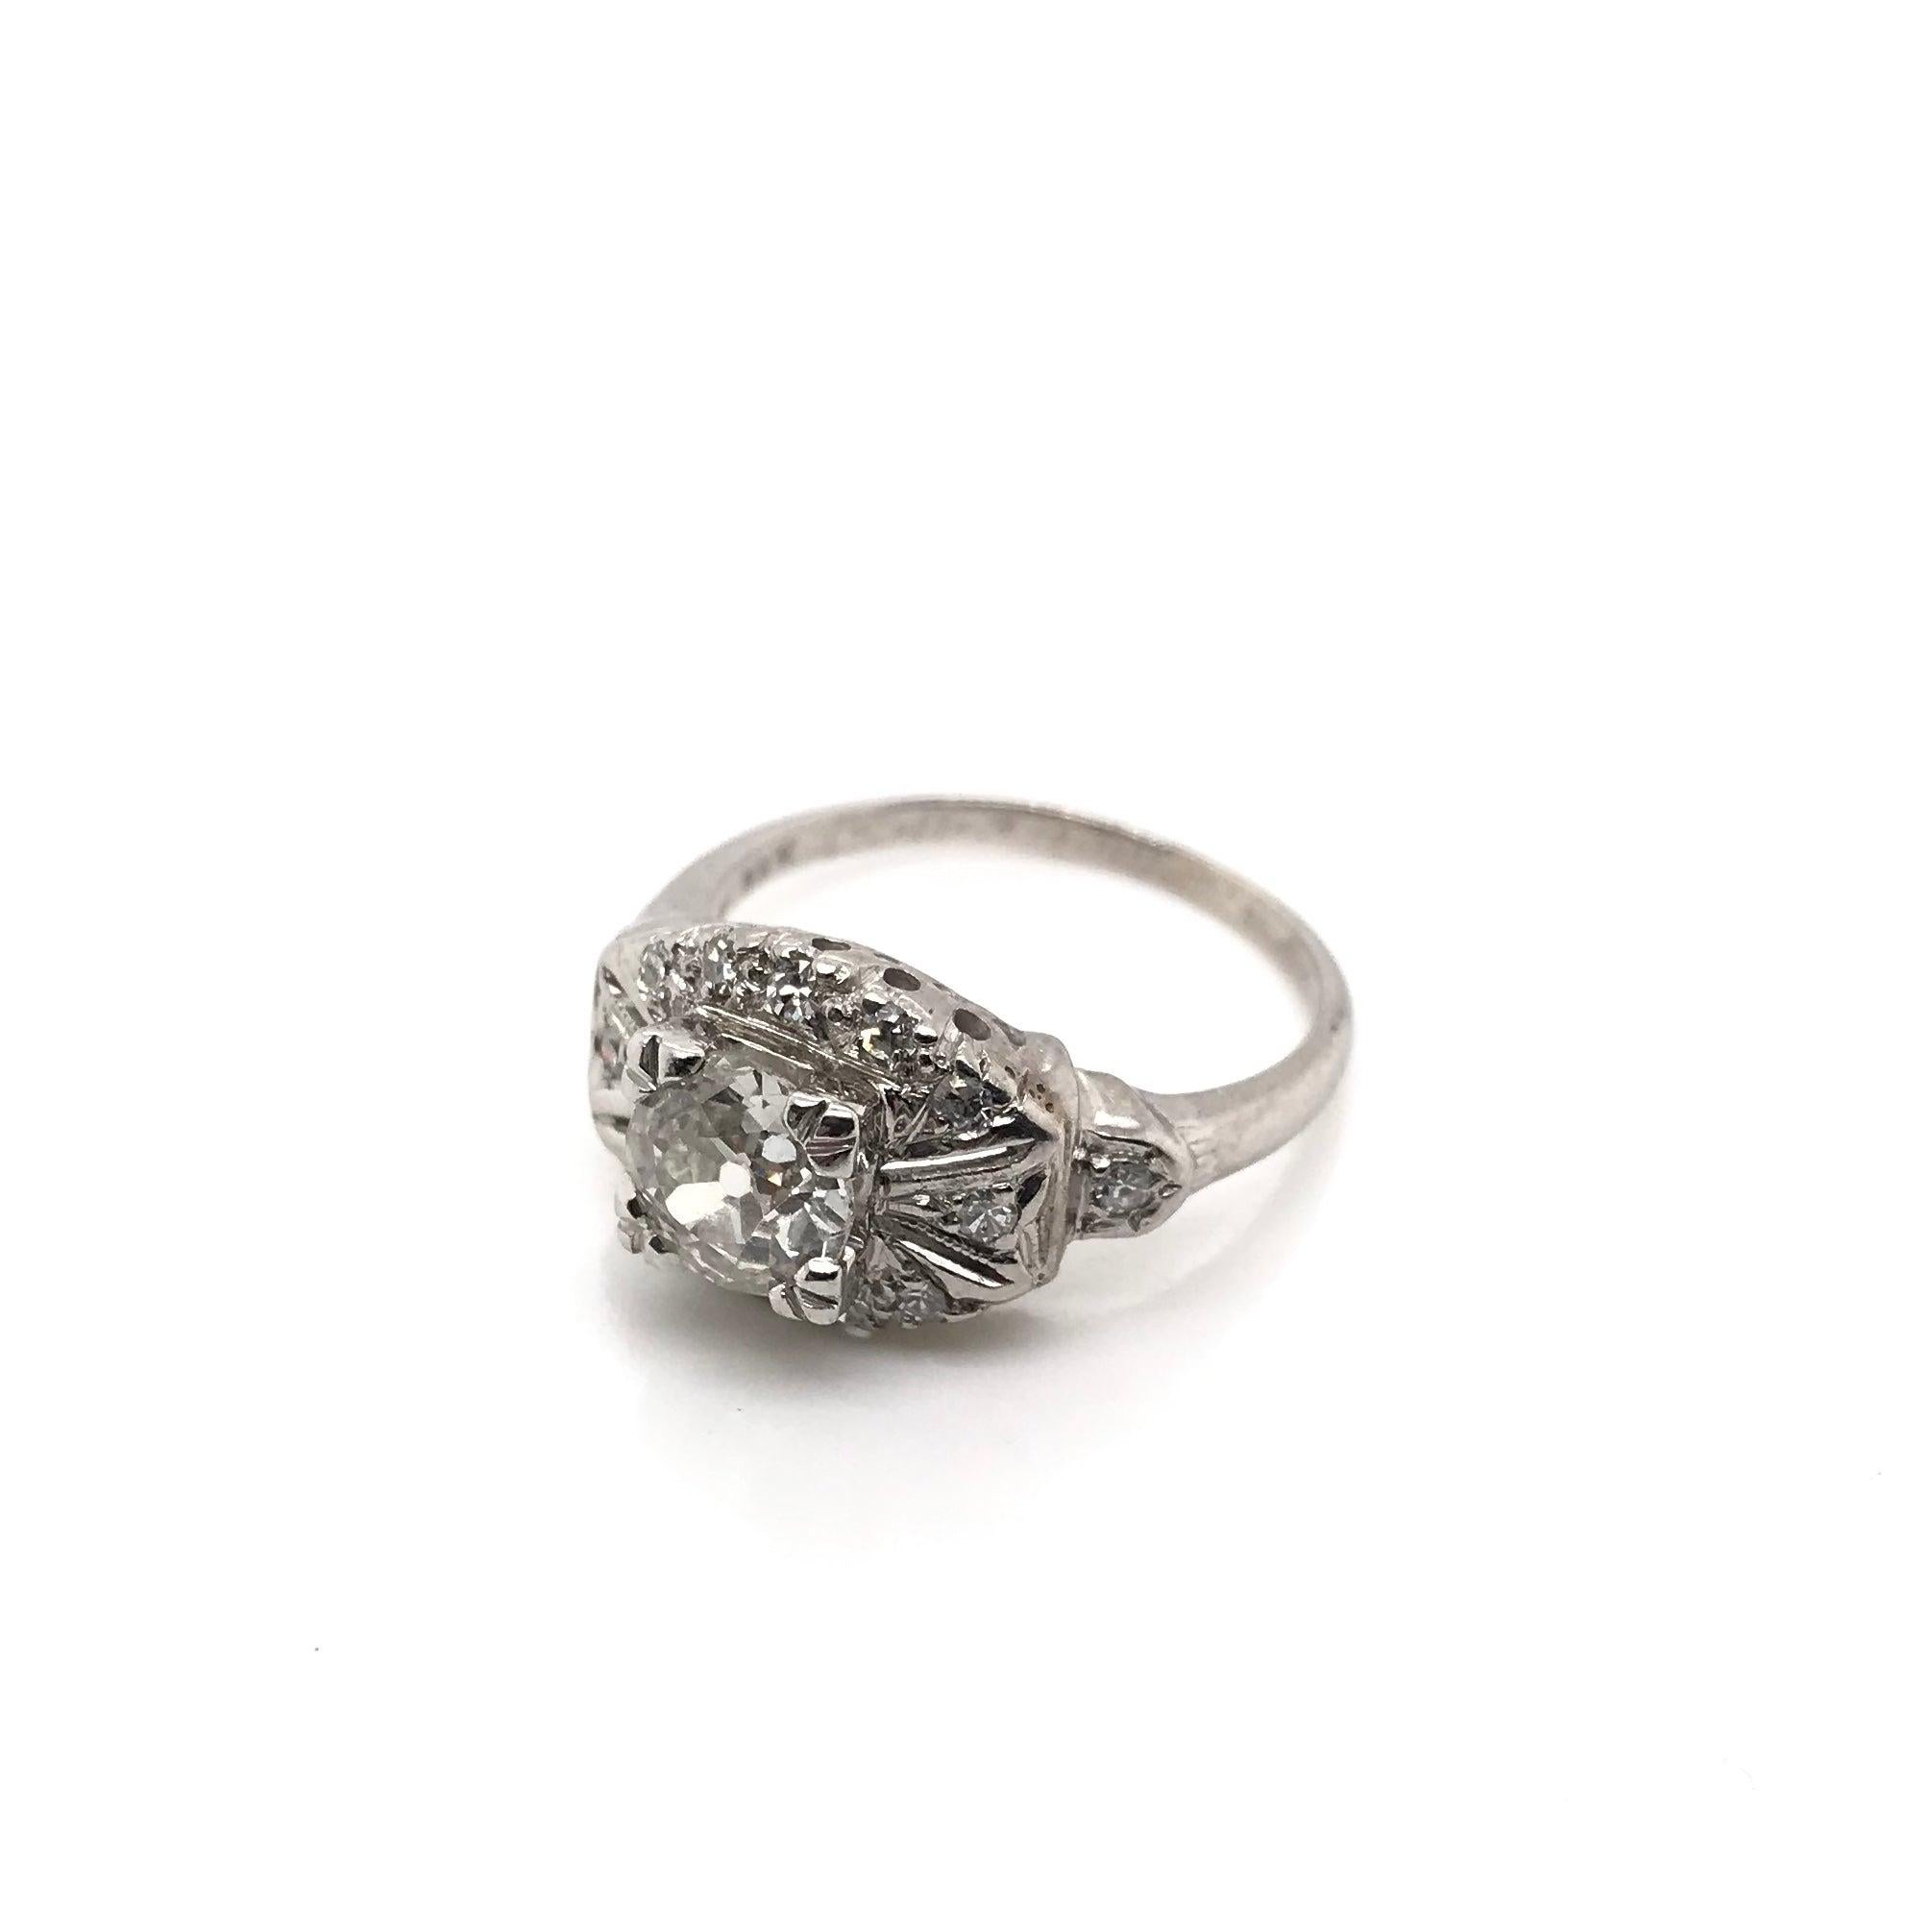 This antique piece was handcrafted sometime during the Art Deco design period (1920-1940) and was dedicated with the date 6-11-37 on the inside of the band. The setting is 14K white gold and features a center diamond measuring approximately 0.80